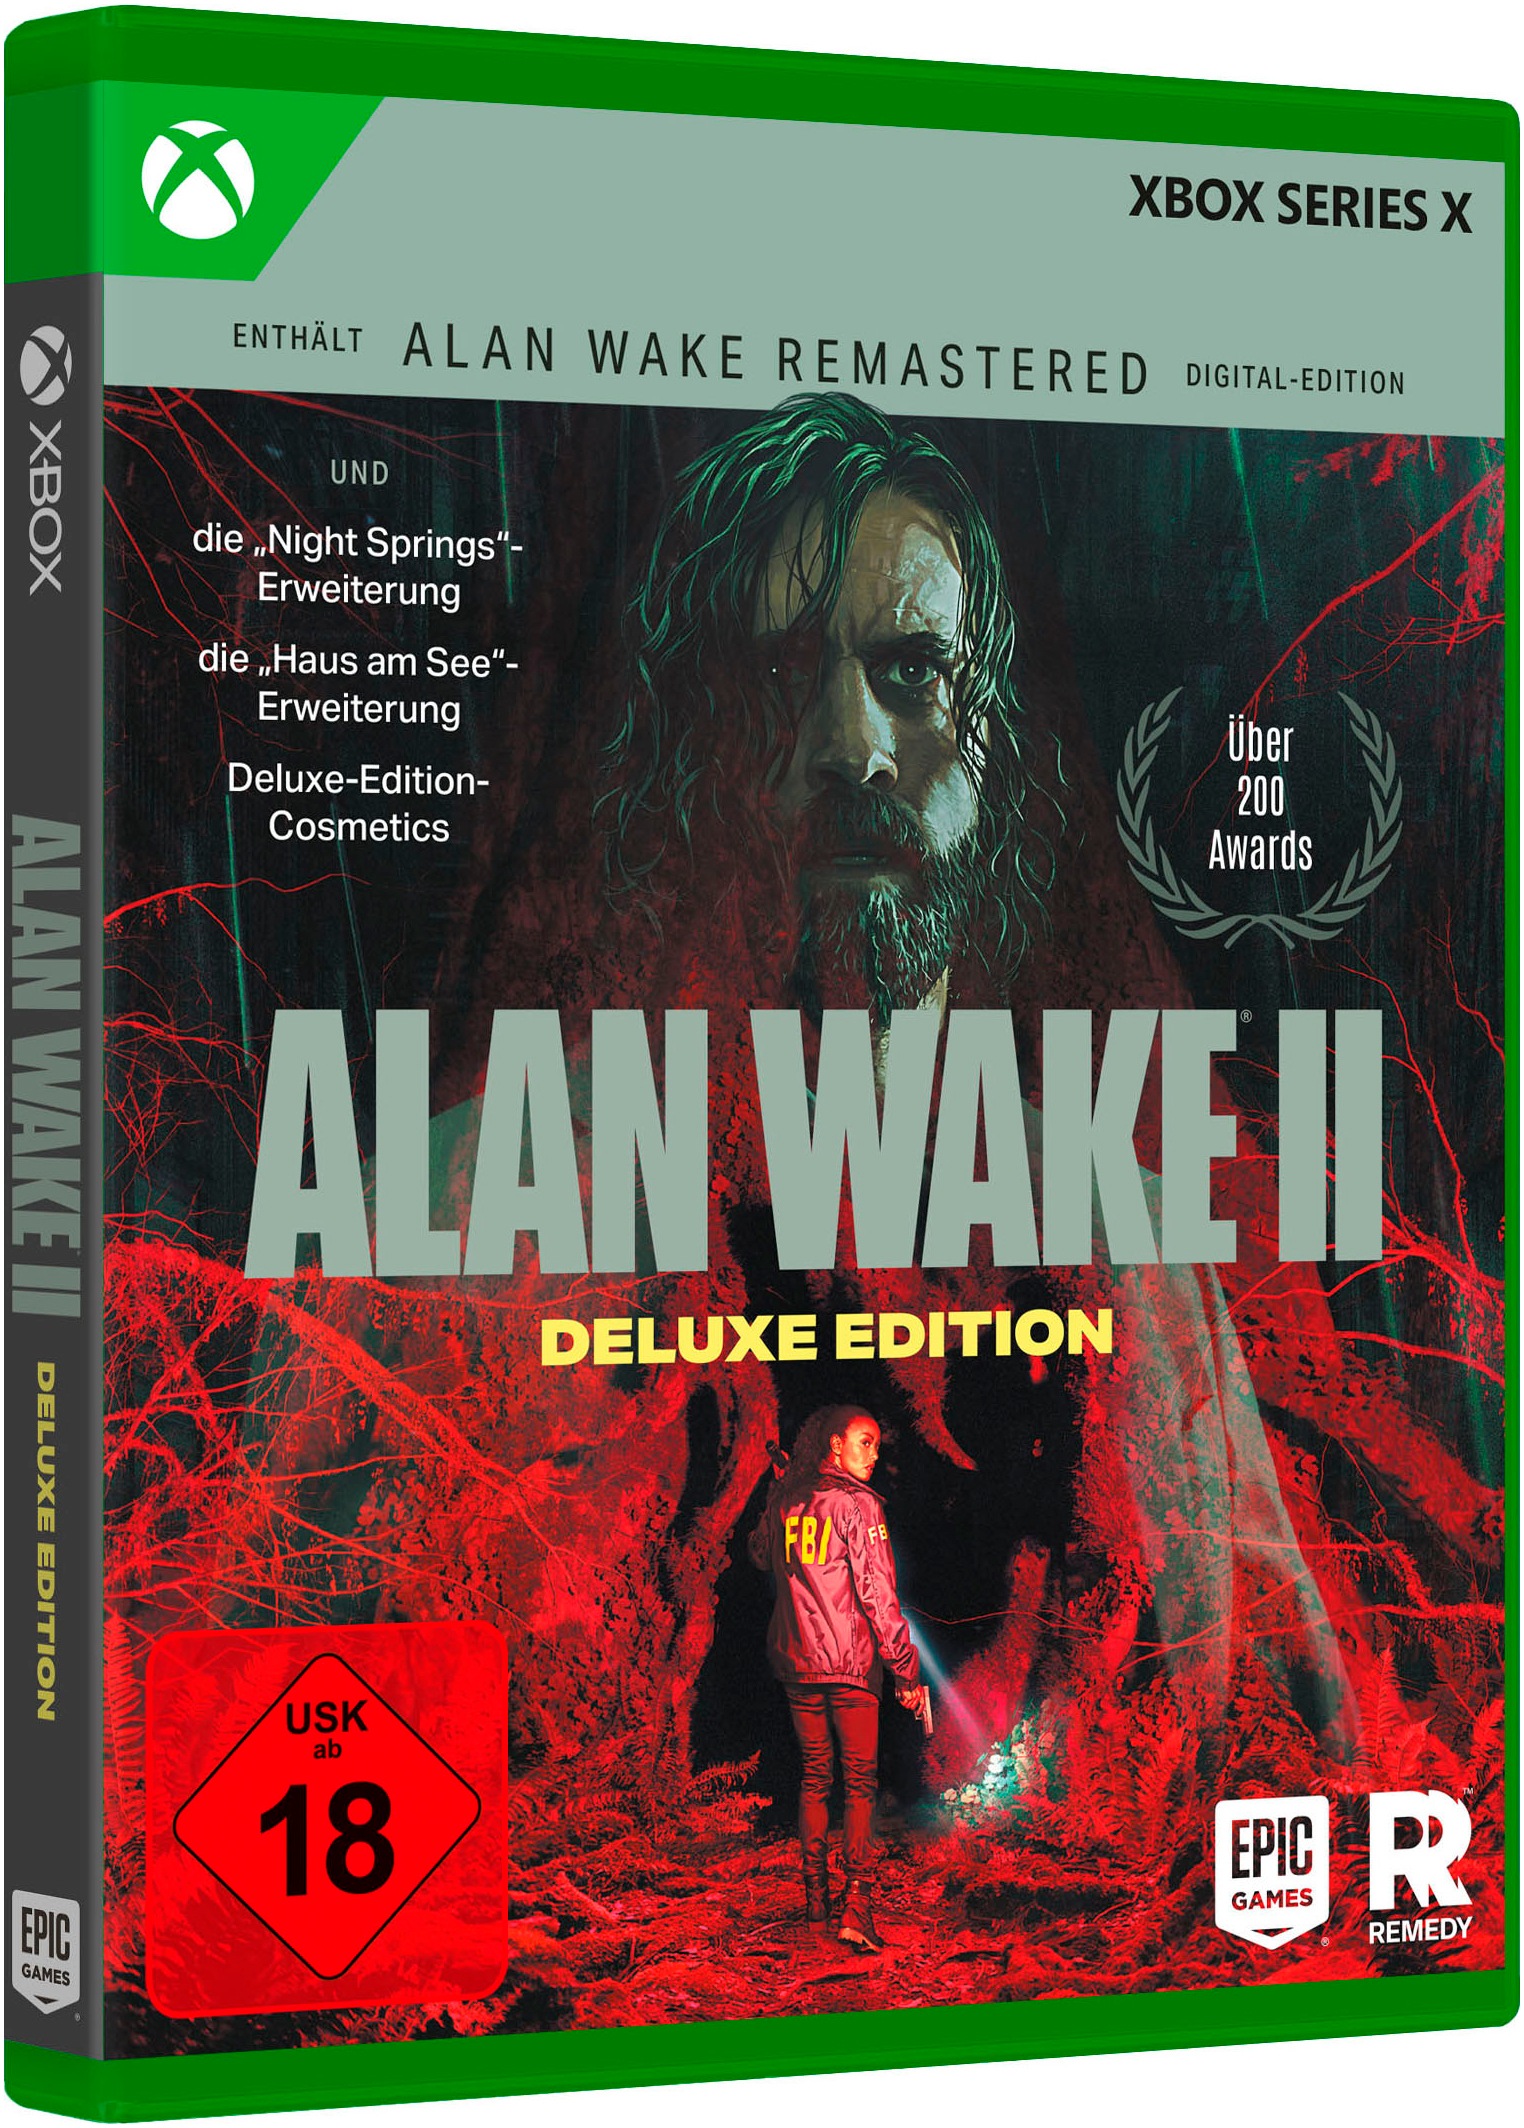 Spielesoftware »Alan Wake 2 Deluxe Edition«, Xbox Series X